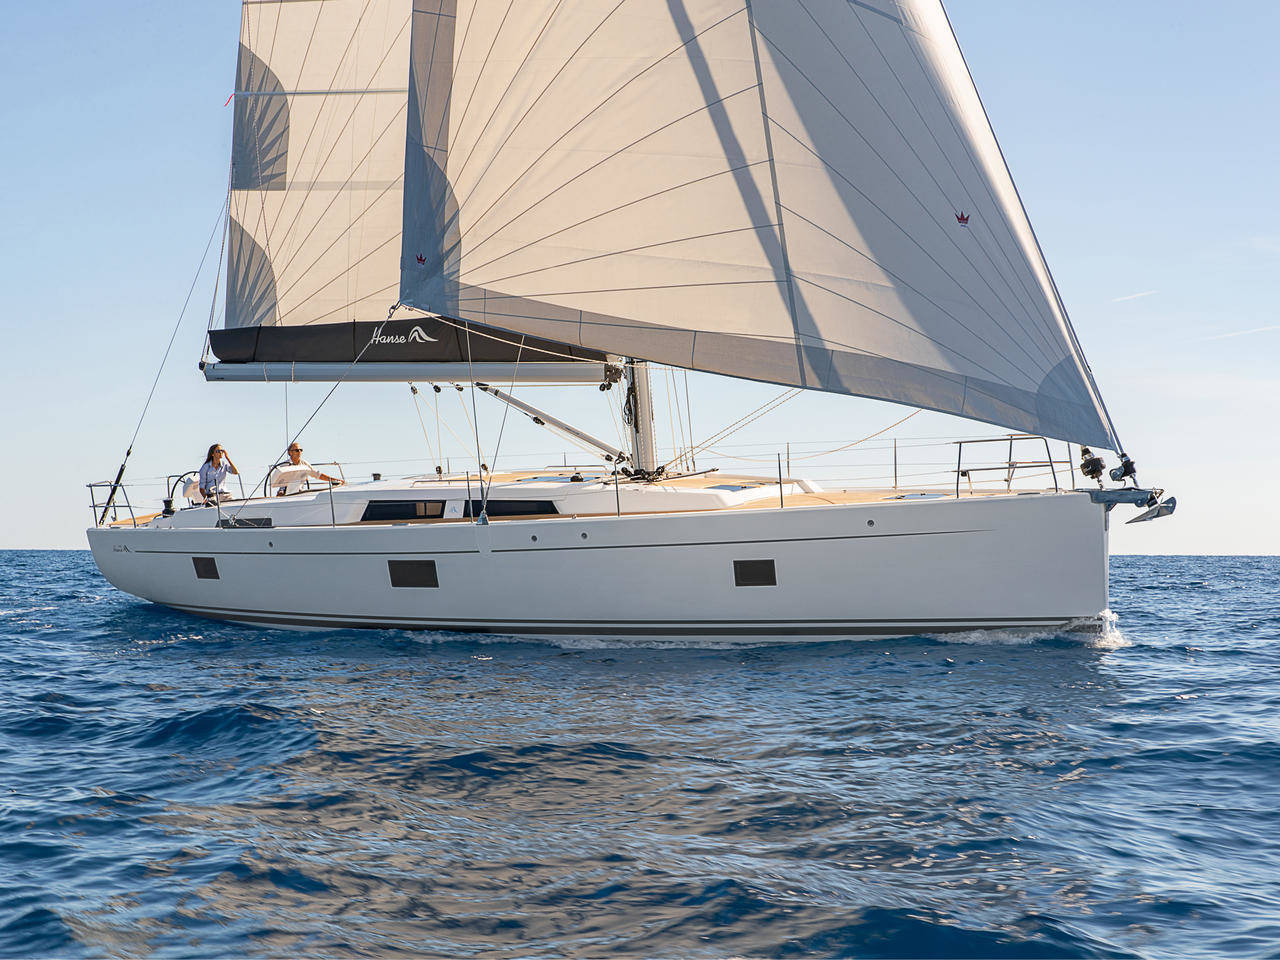 Hanse 508 yacht under full sail on delivery to Jersey